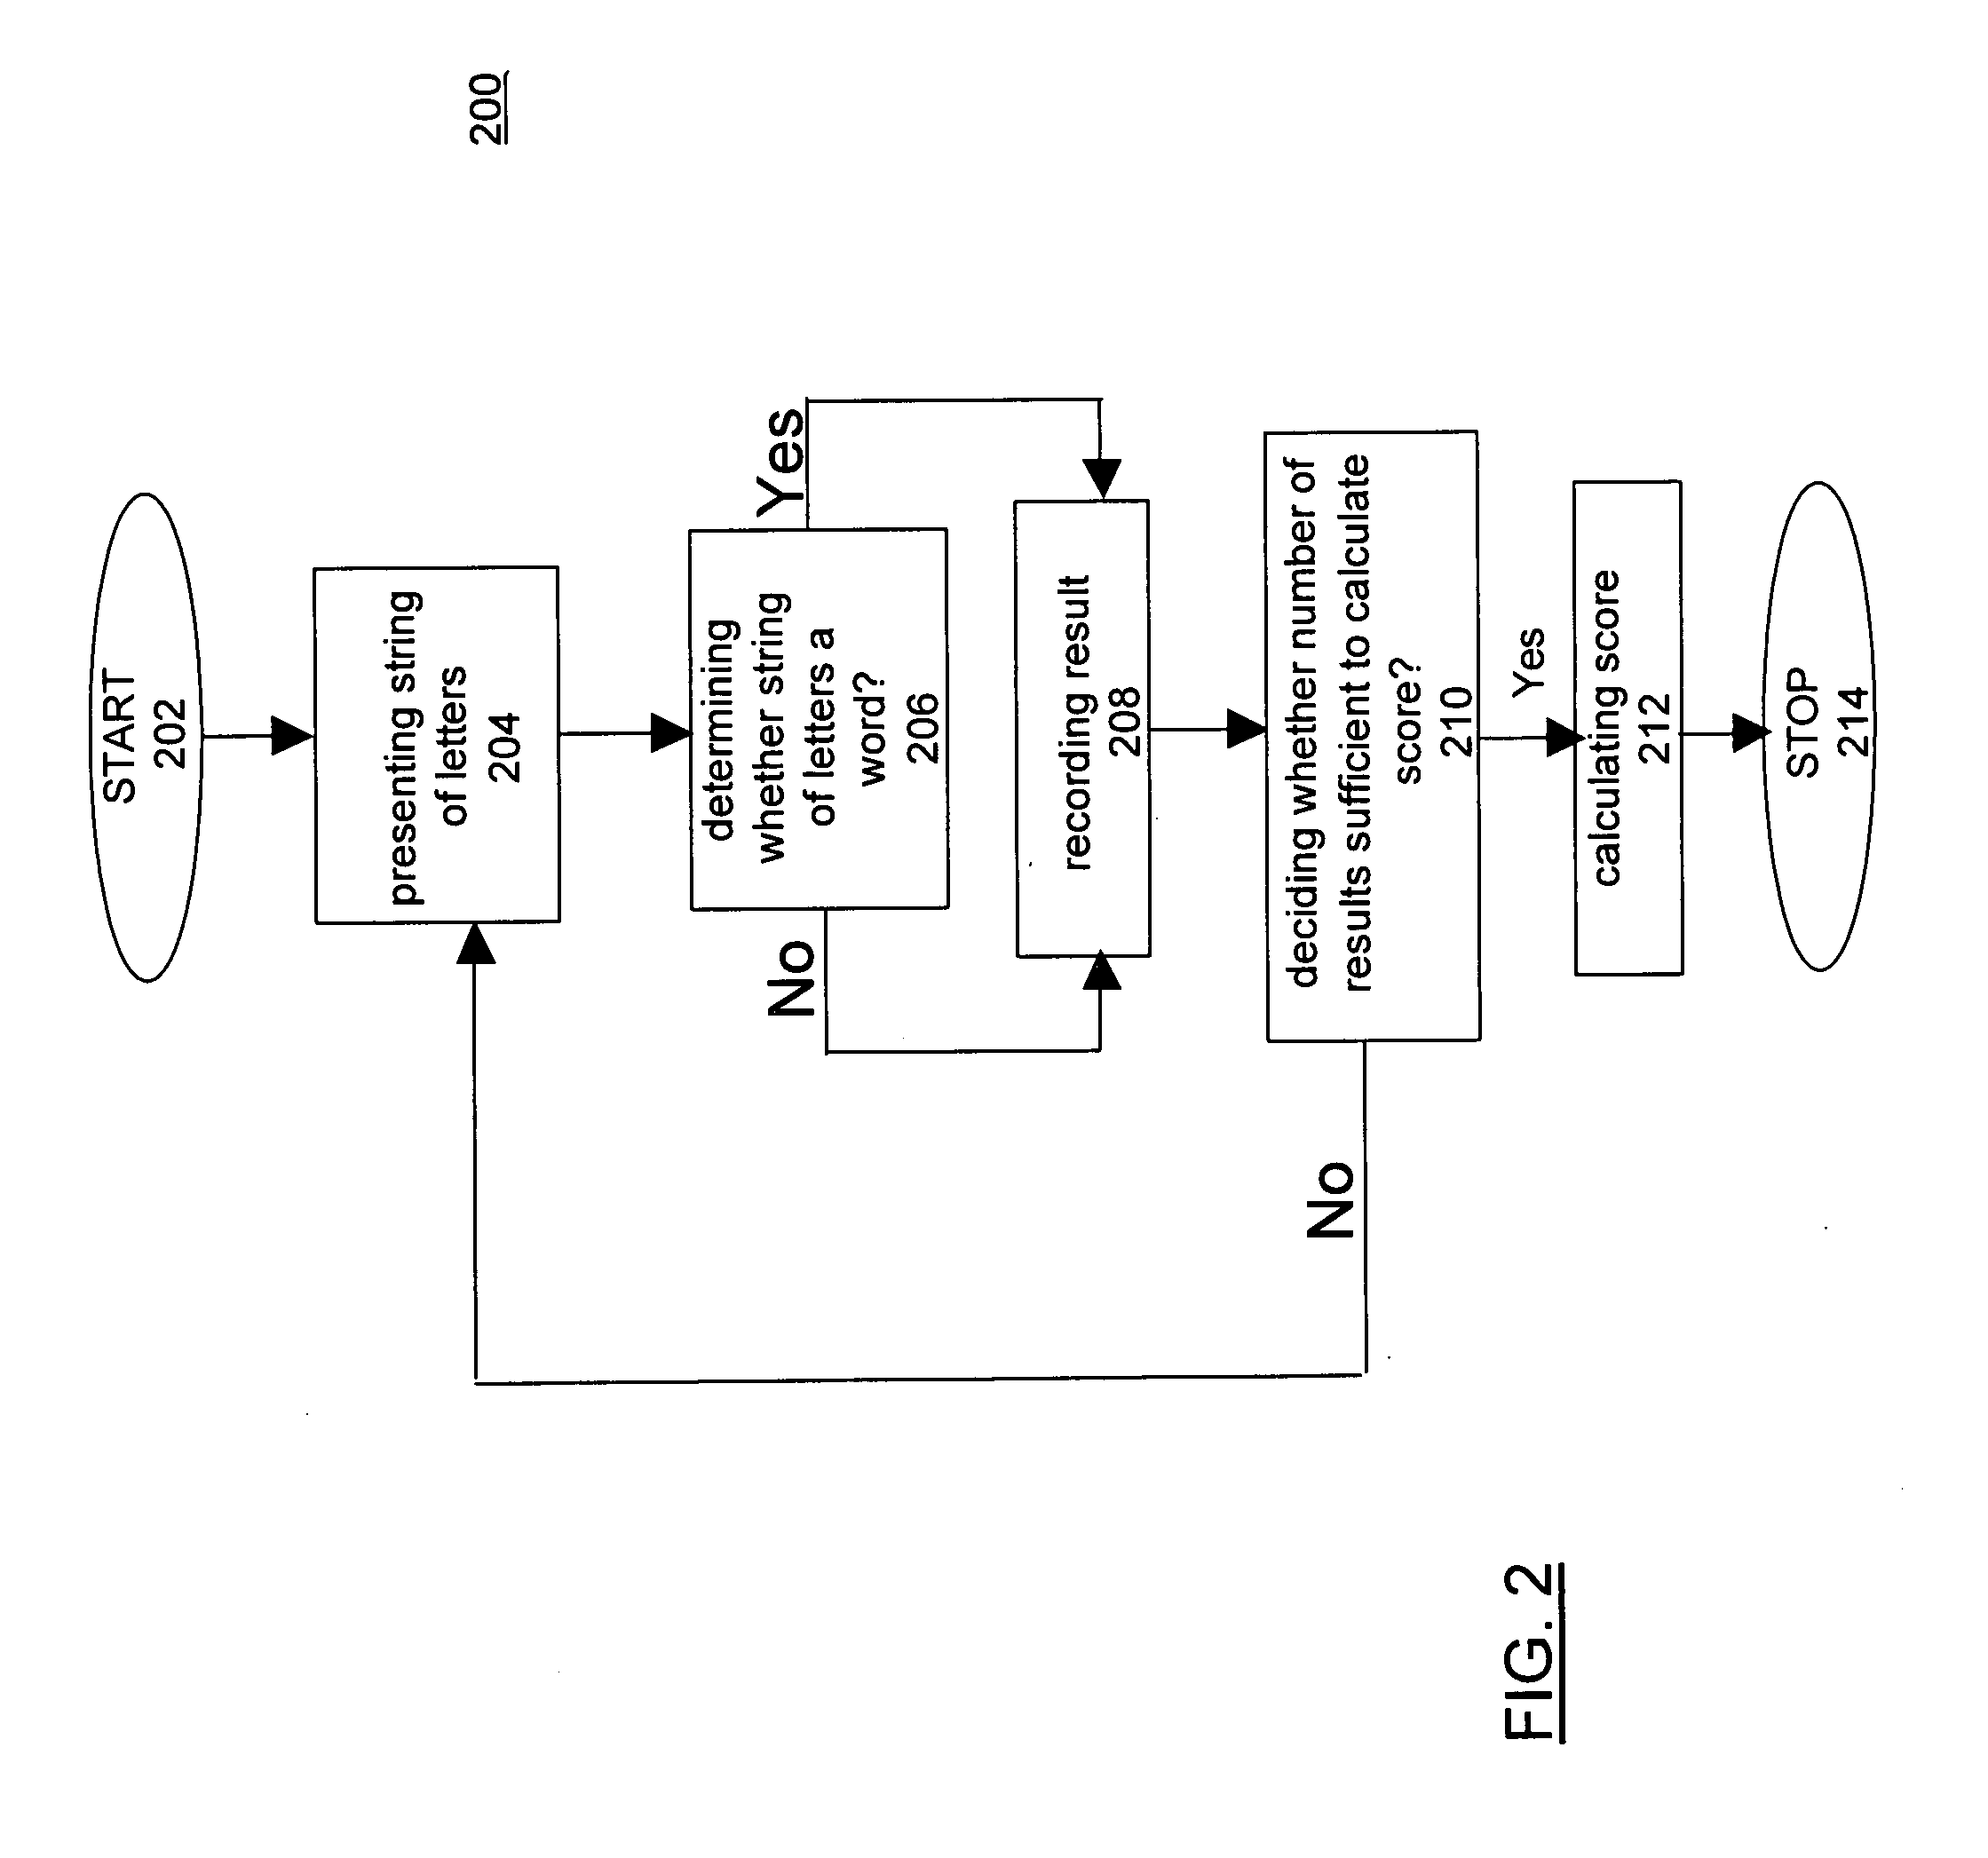 System and methods for a reading fluency measure